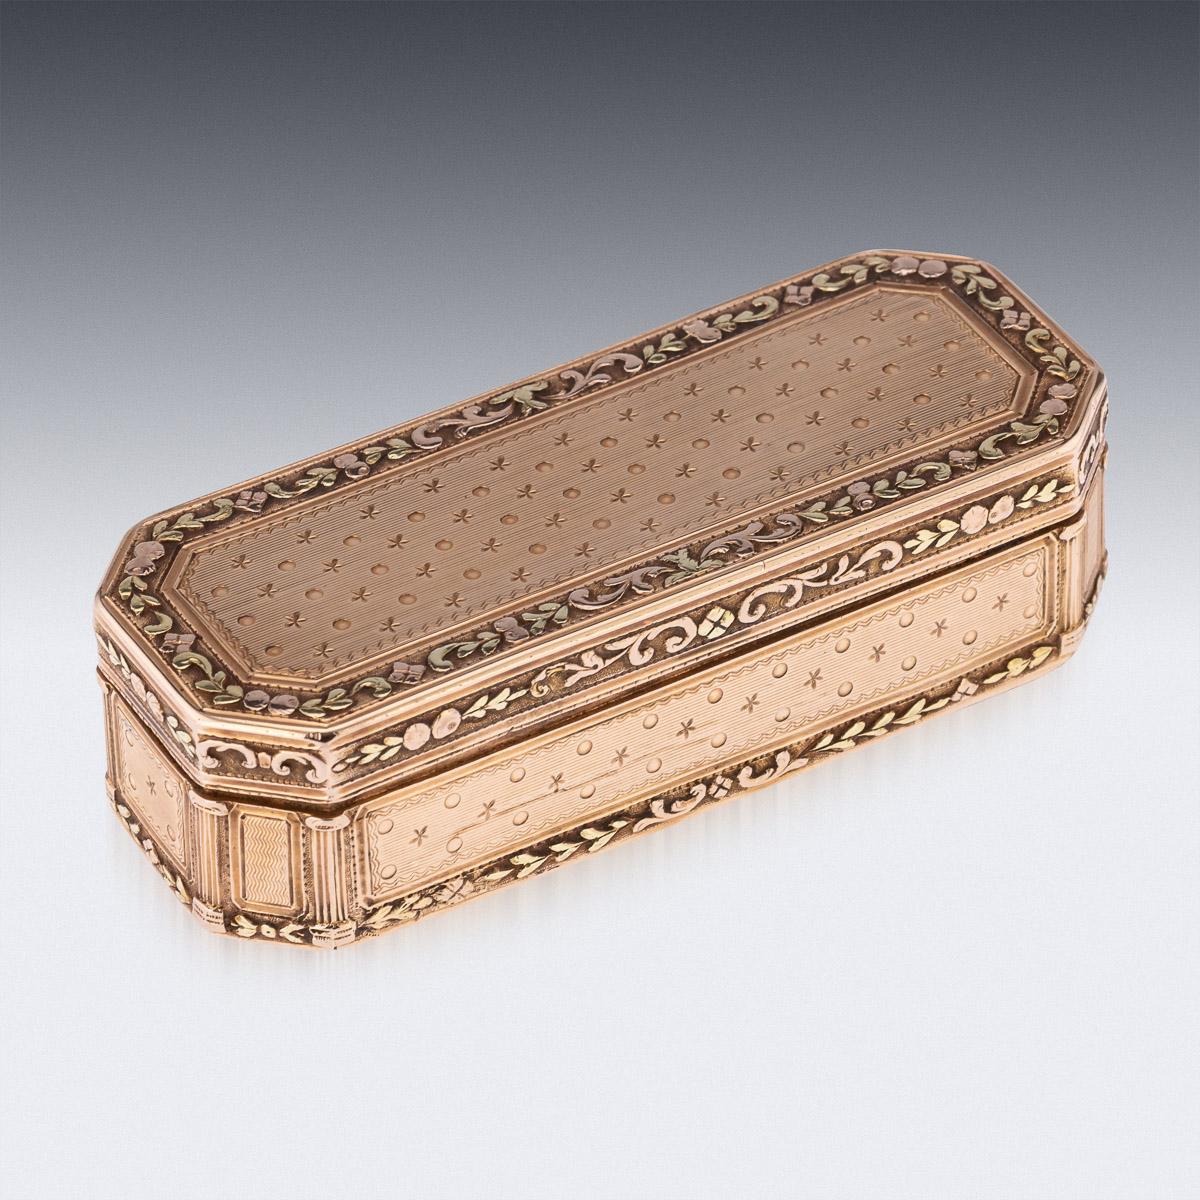 Antique late-18th century French three-coloured 18k gold snuff box, of elongated rectangular form with cut corners, all sides beautifully engraved with engine turned decoration, stamped with dots and stars, boarders decorated with laurel leaves and